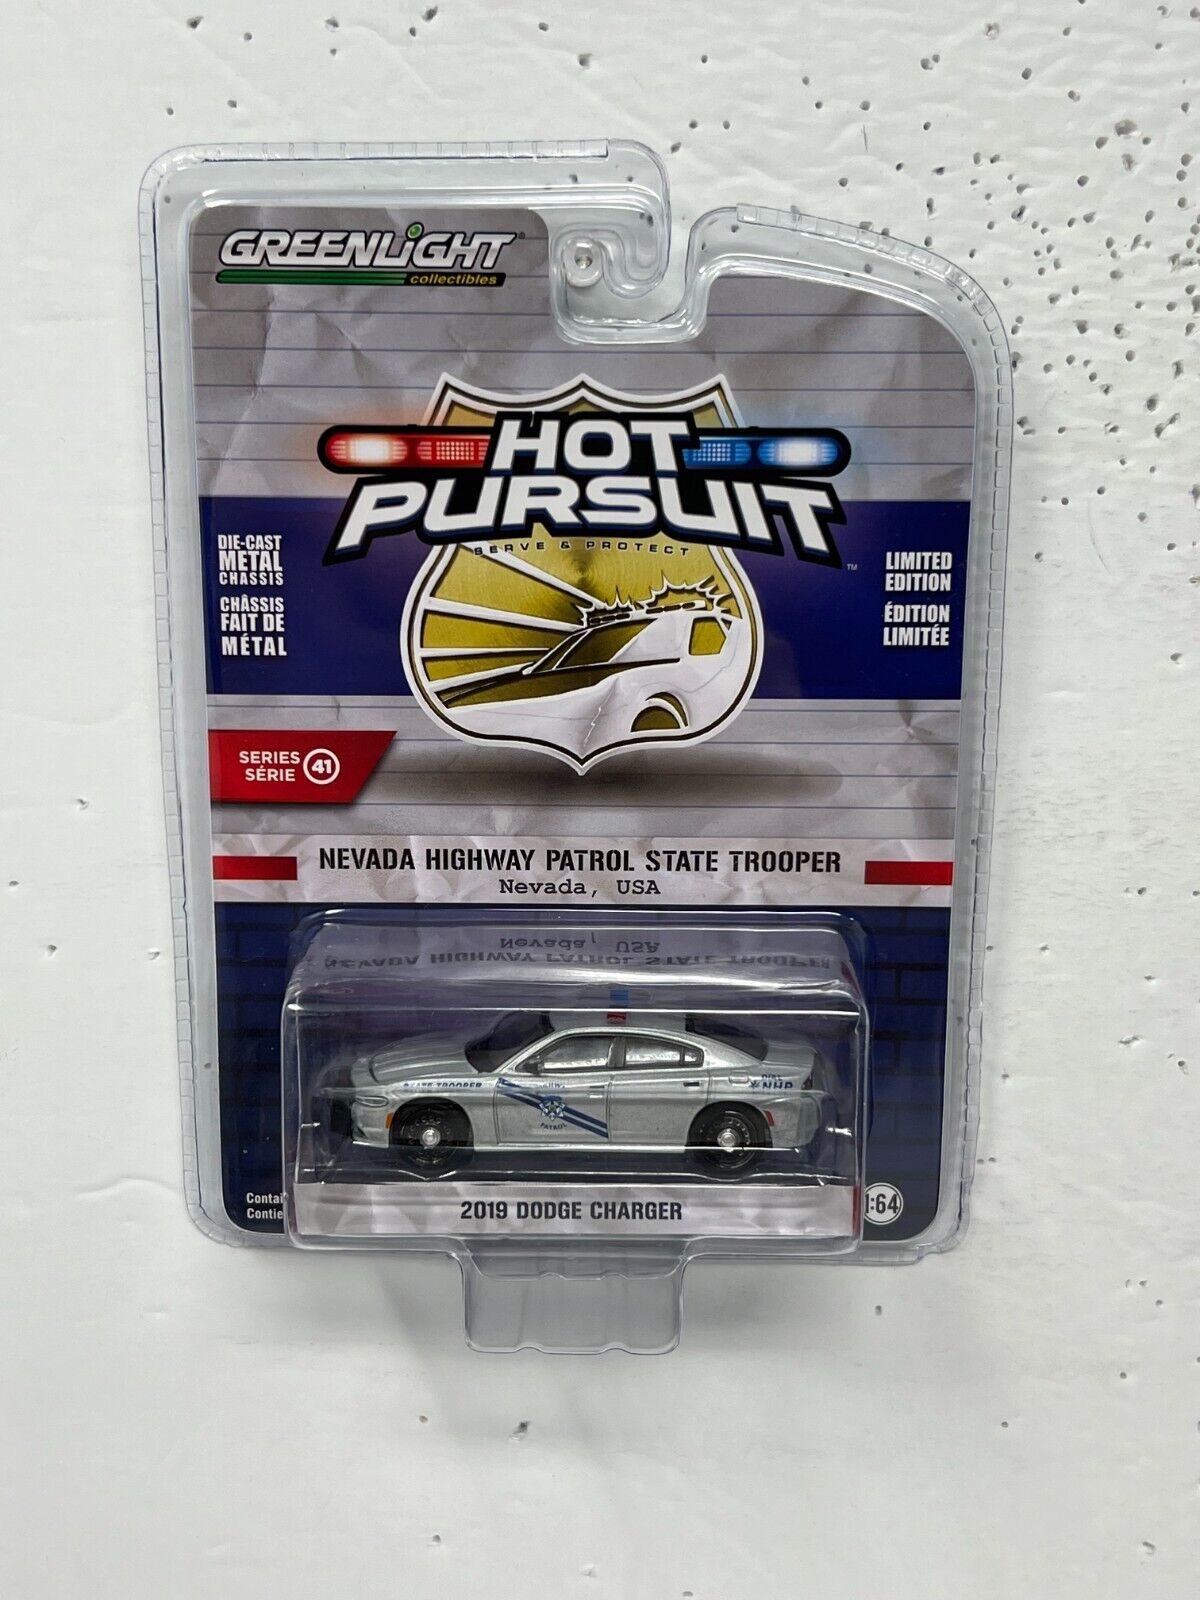 Greenlight Hot Pursuit 2019 Dodge Charger 1:64 Diecast